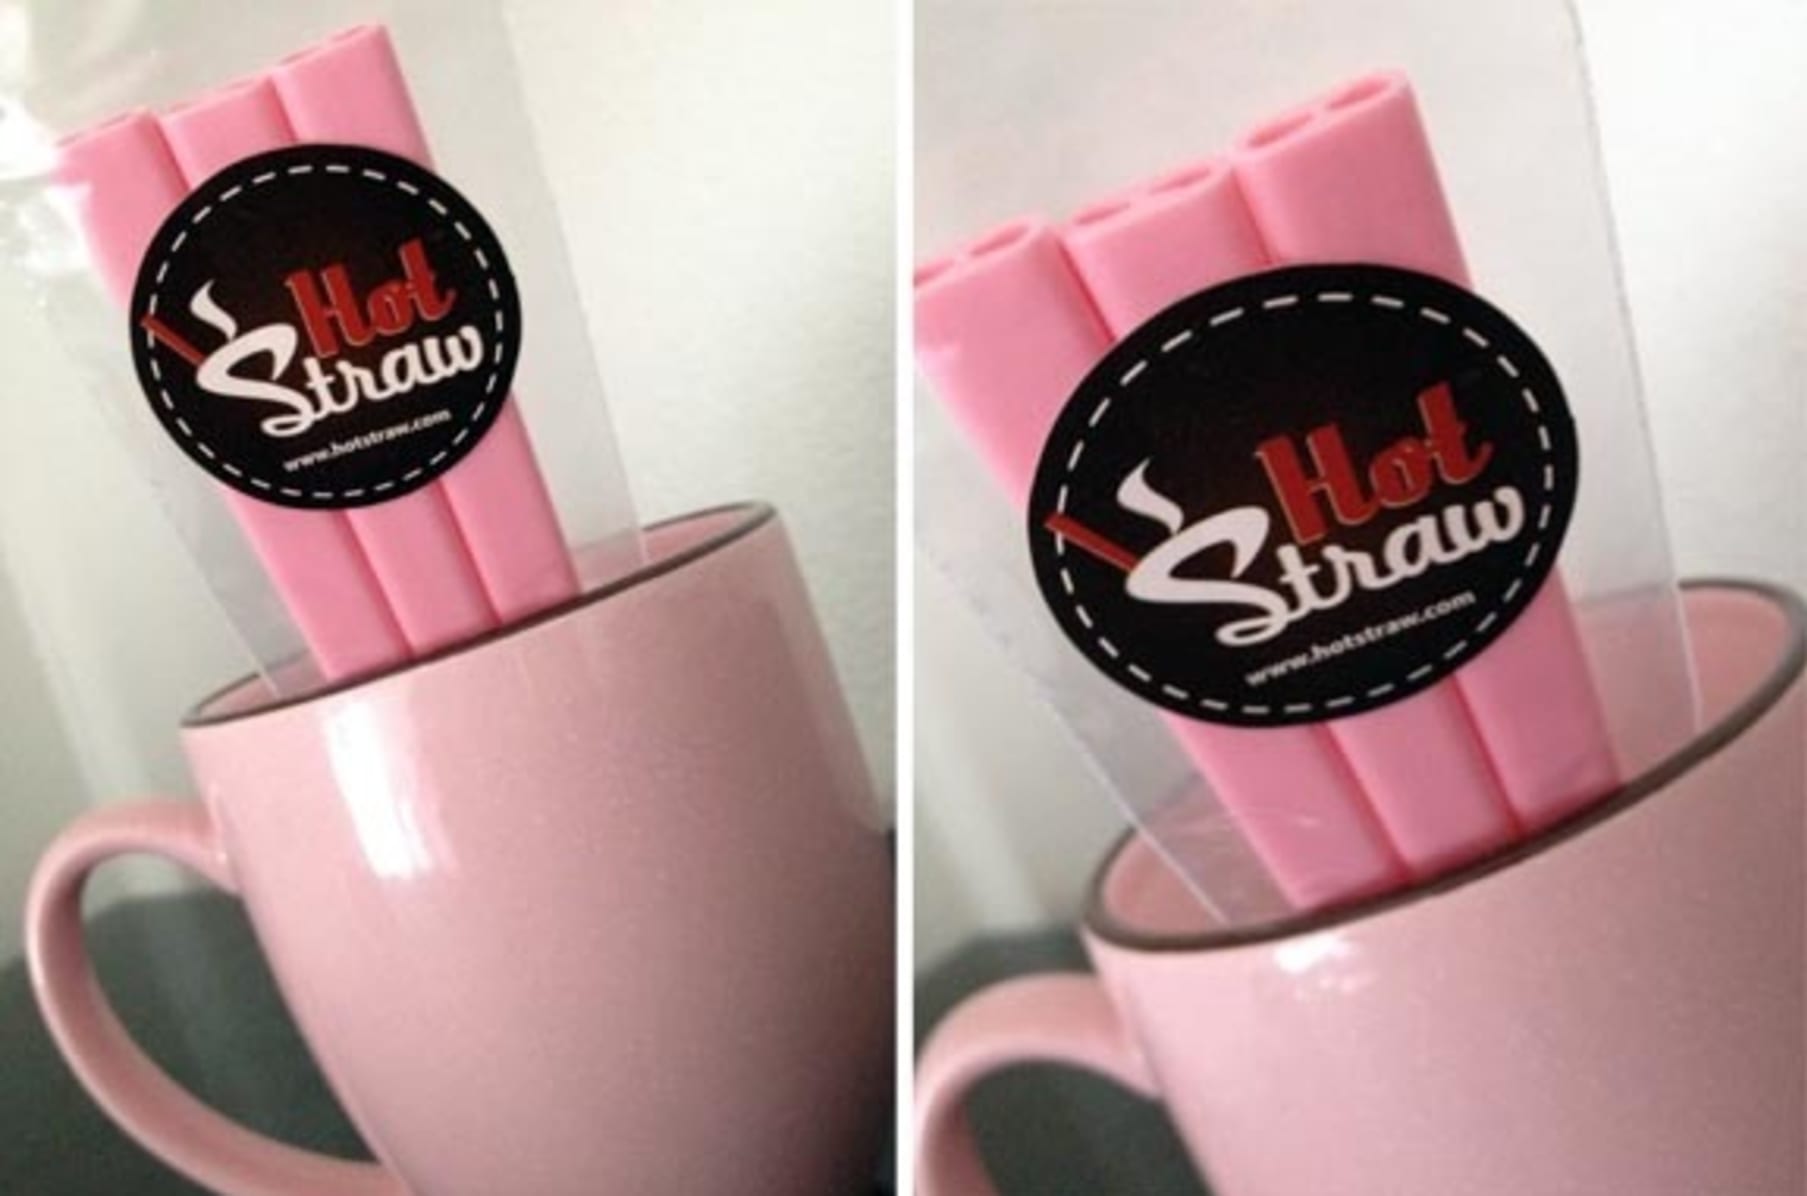 hot straw :: safer way to drink hot beverages :: review + giveaway